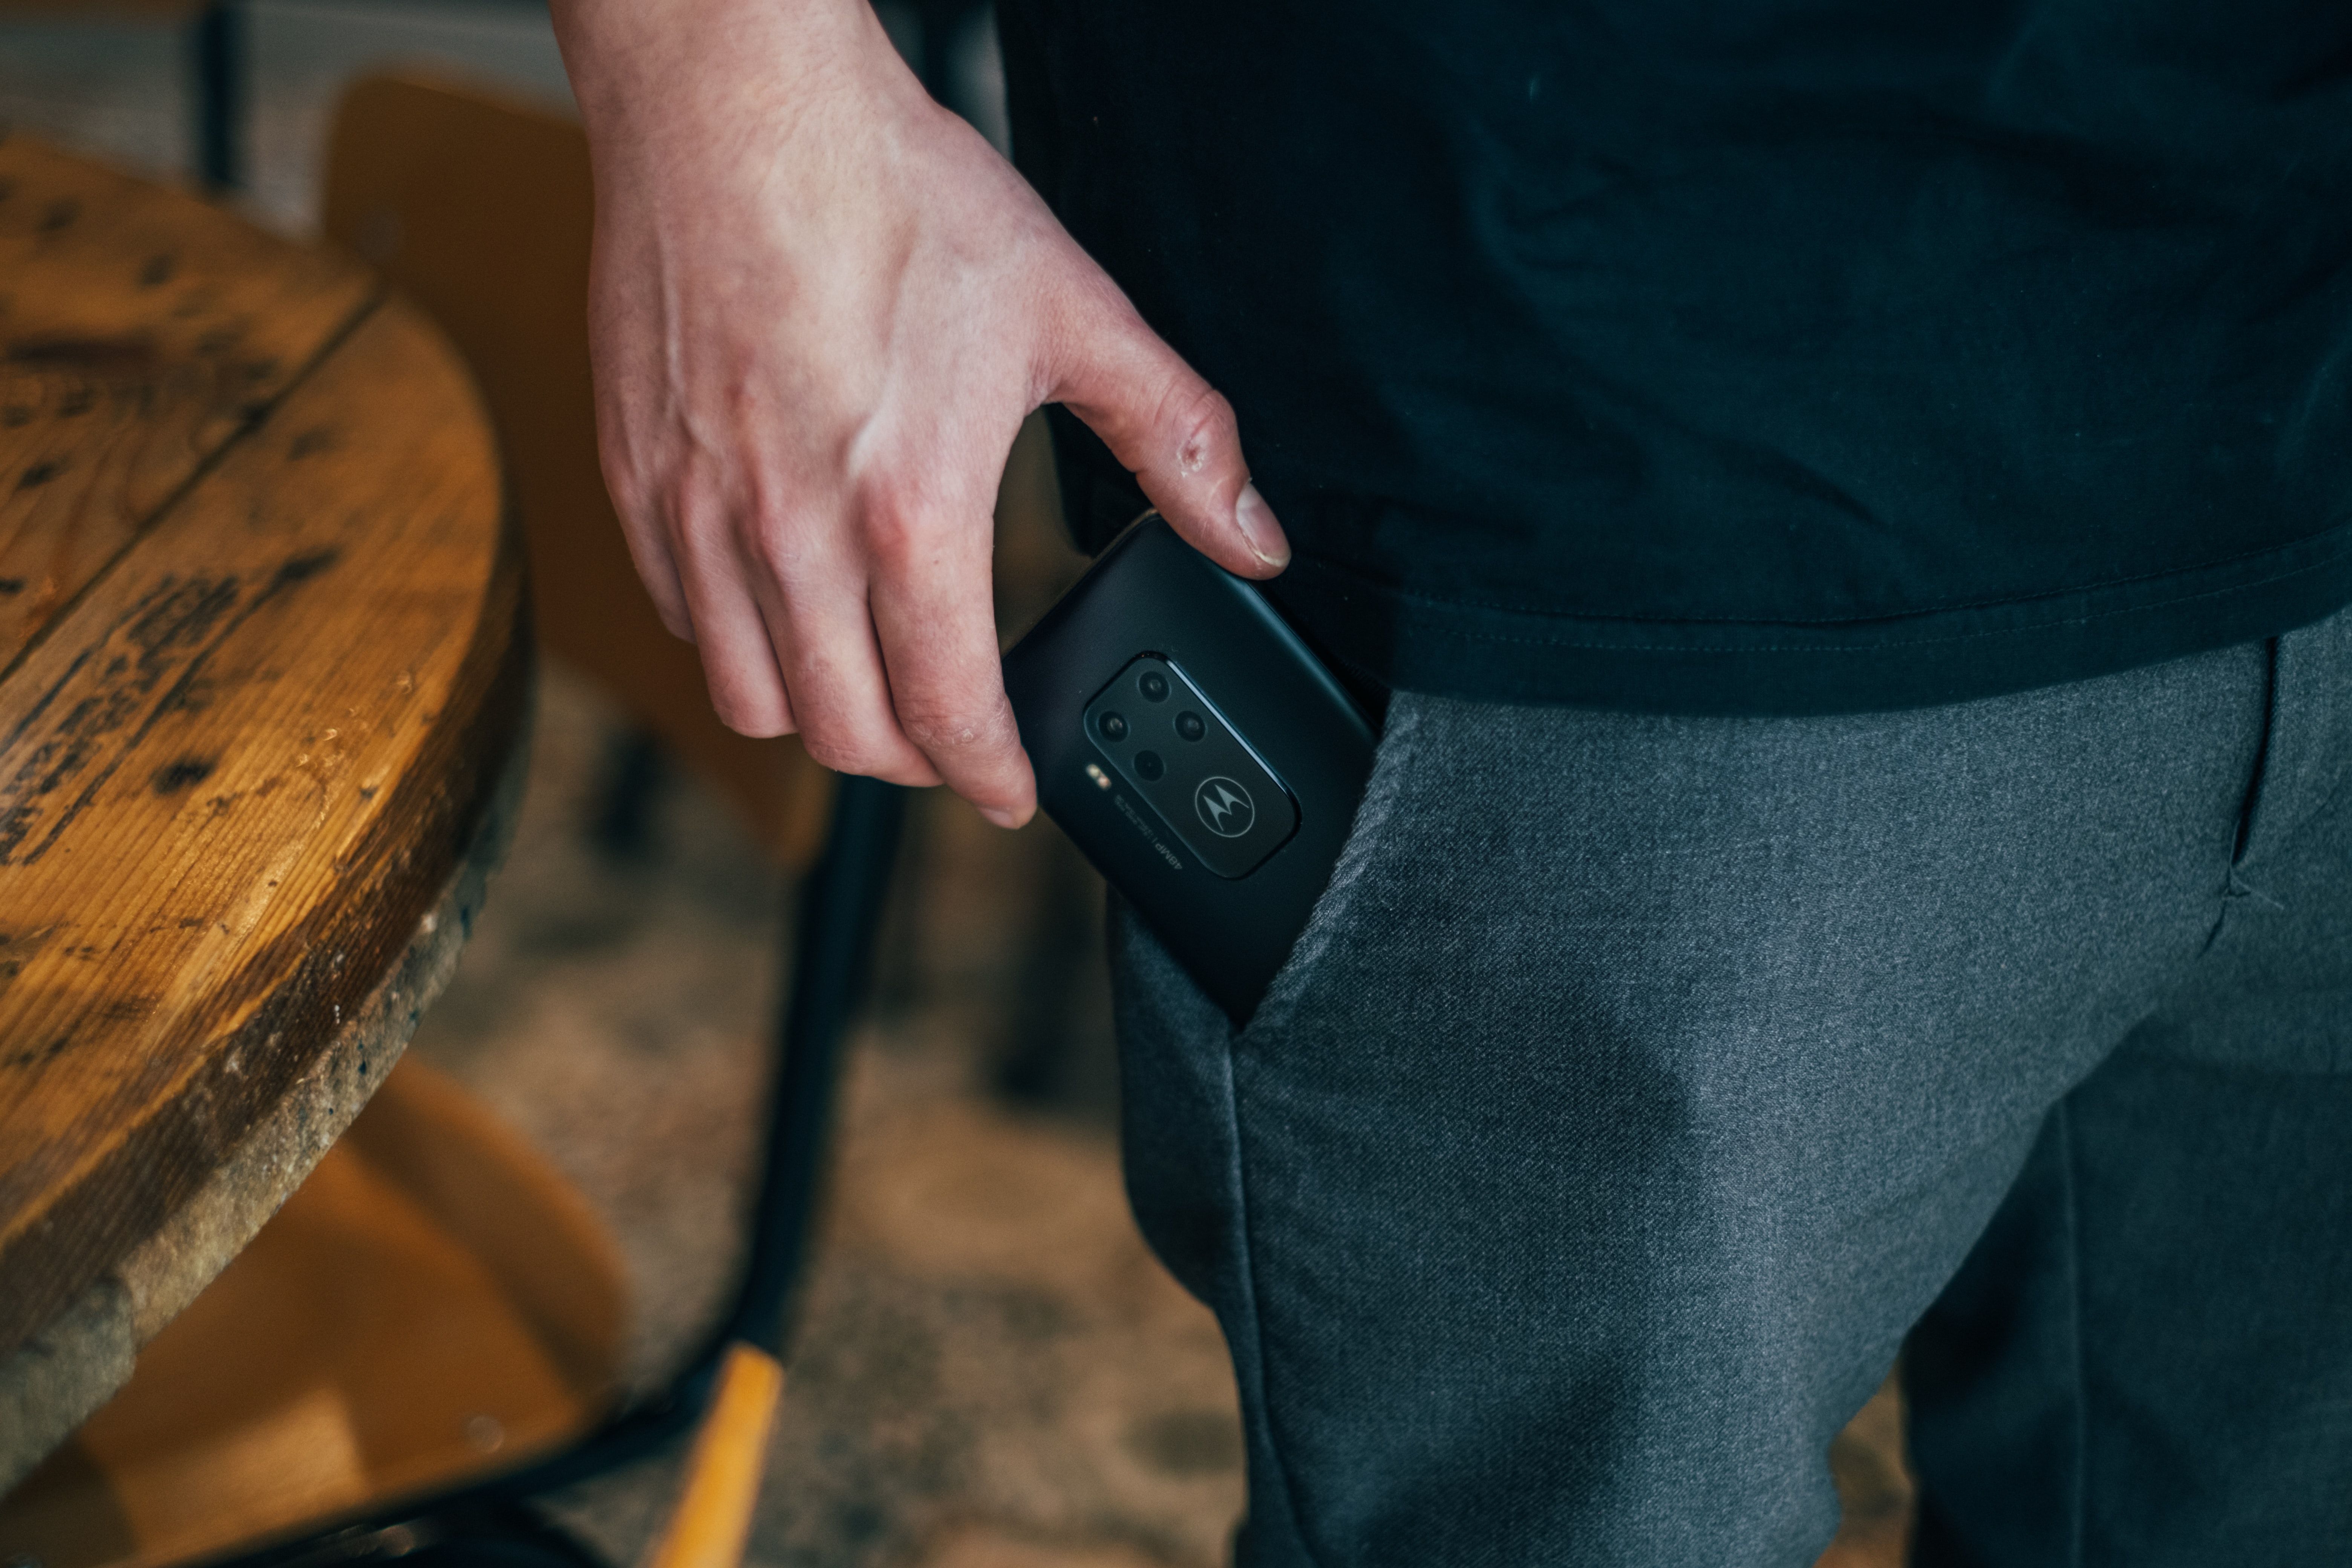 A Motorola phone being put into a pocket where lint and dust could accumulate inside the audio jack